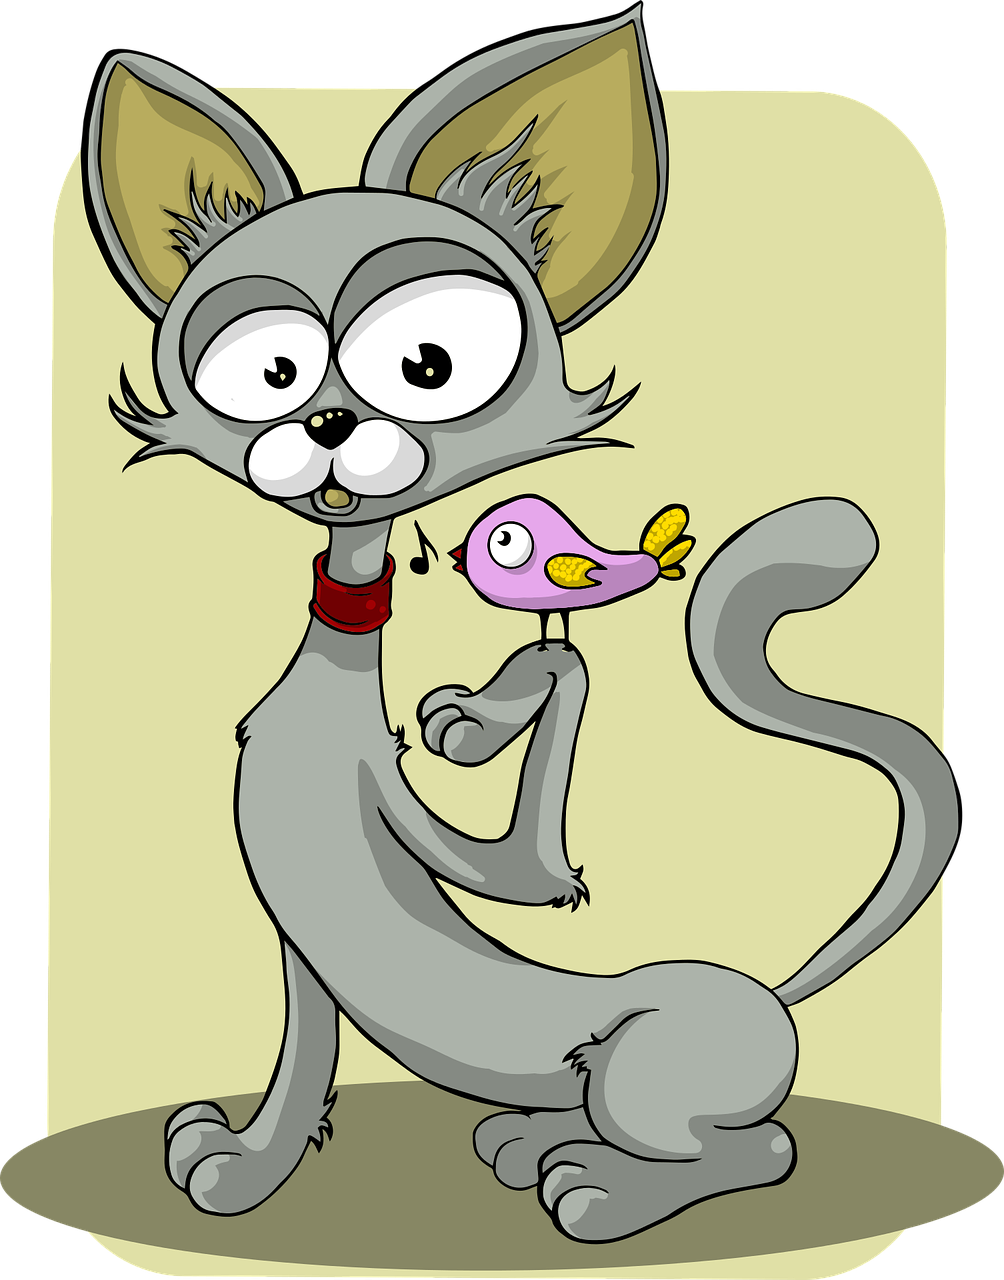 a cartoon cat with a bird in its mouth, vector art, inspired by Hanna-Barbera, deviantart contest winner, mouse photo, ashy, !!! very coherent!!! vector art, short cartoon strip